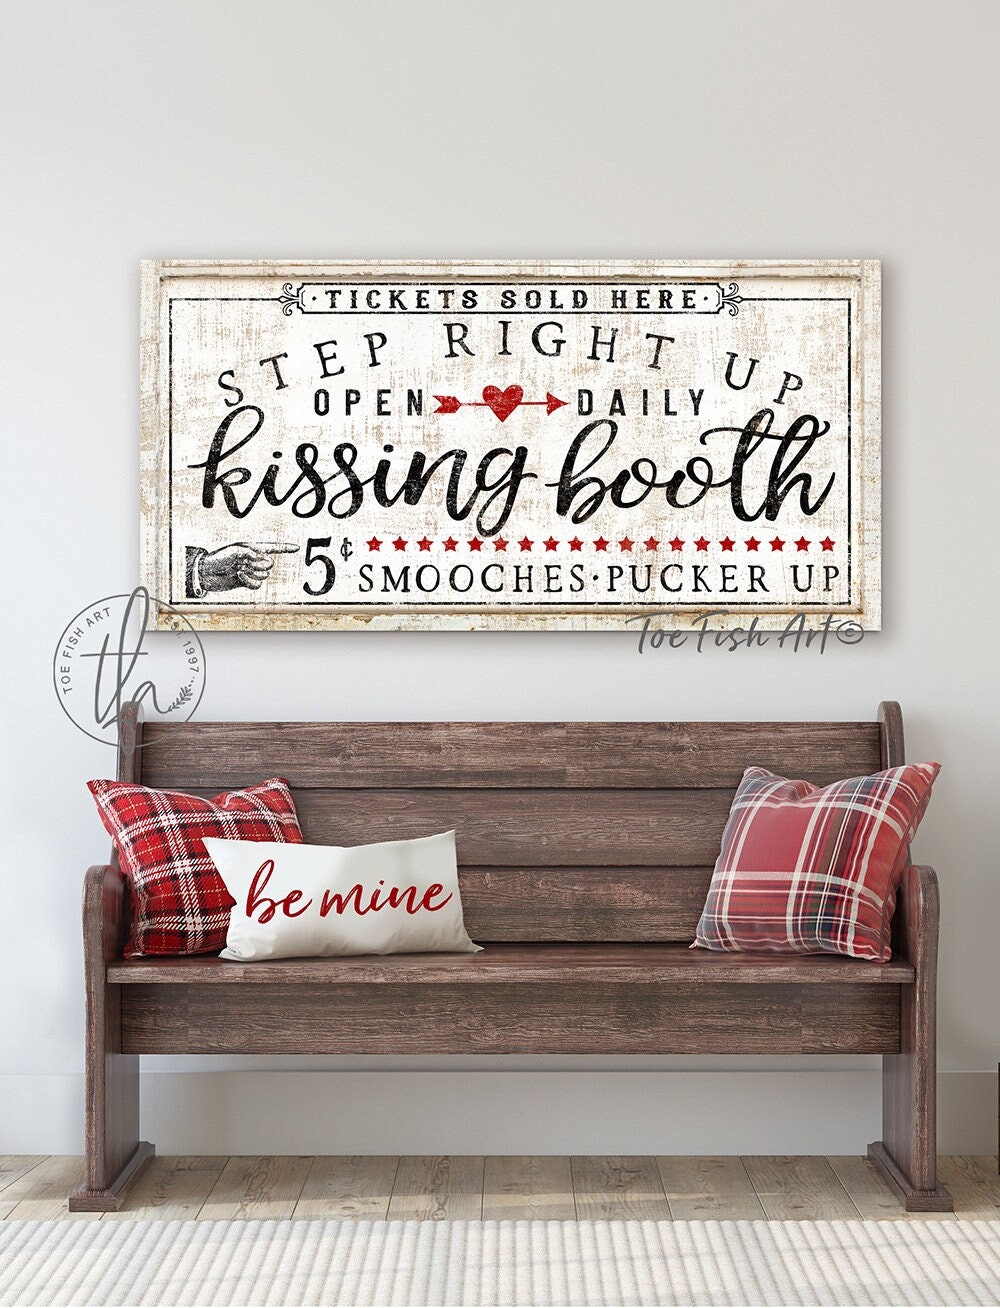 Kisses 50 Cents - Kissing Booth - Funny Quotes Gifts Ideas Art Board Print  for Sale by Sugar-Magnolia